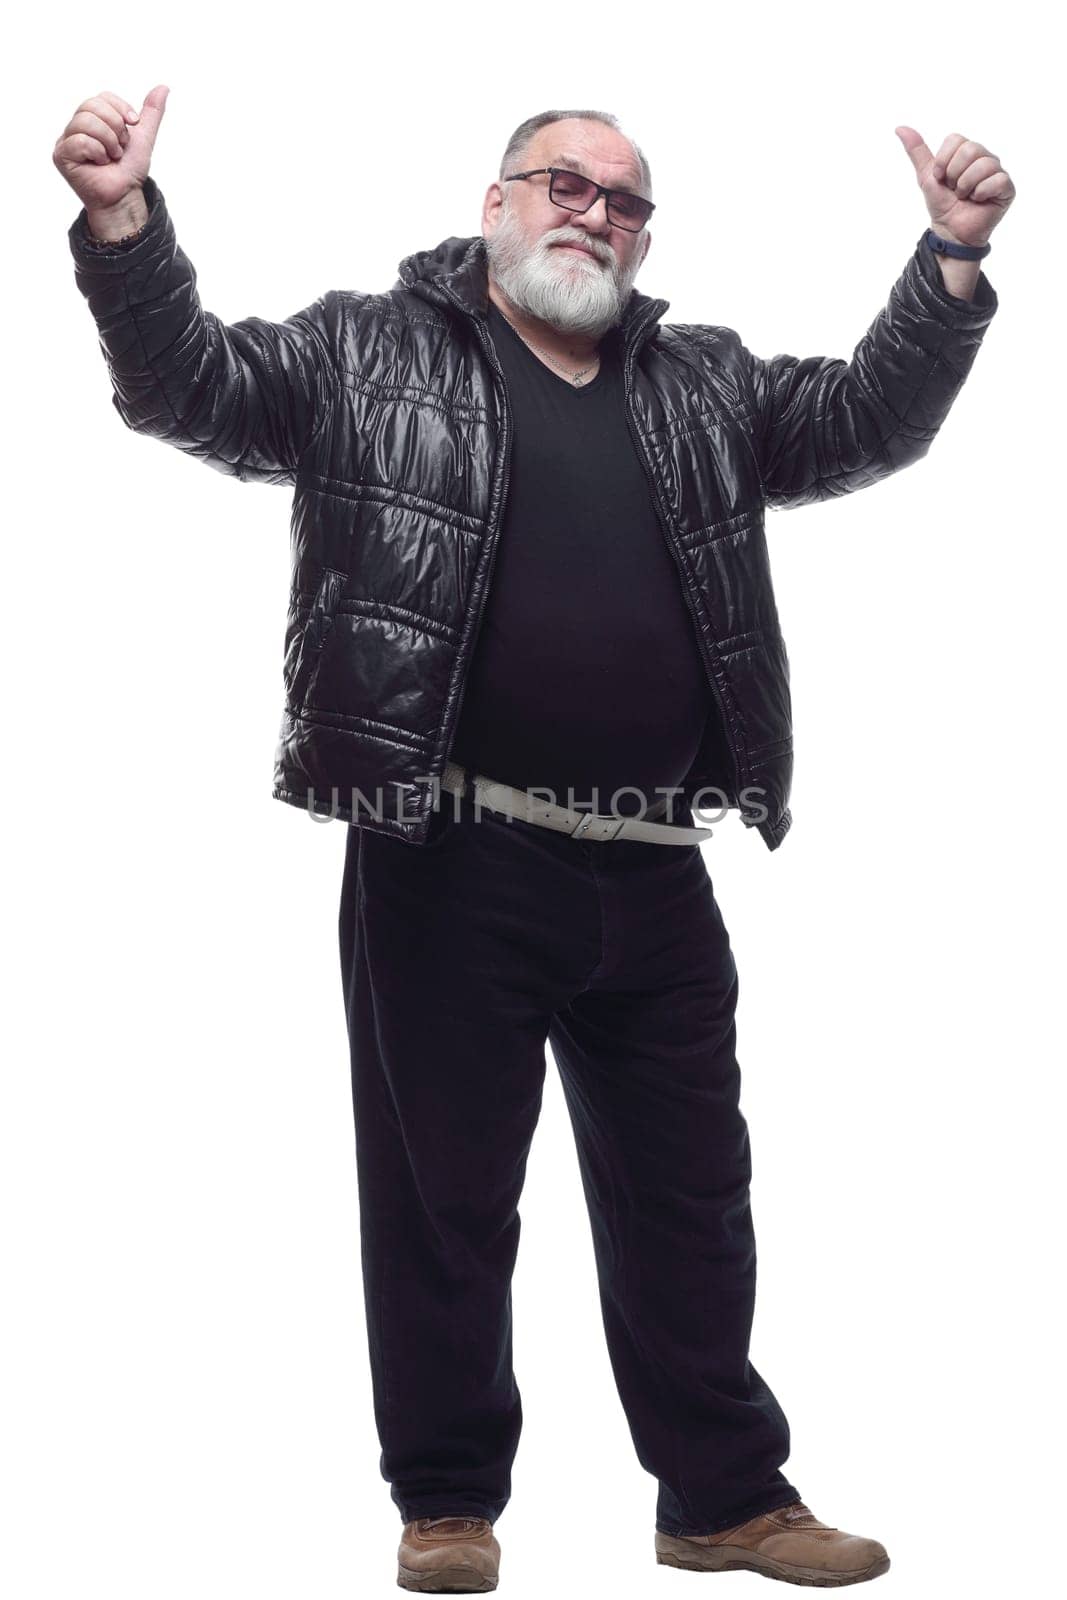 contented bearded man in a black jacket giving a thumbs up. by asdf